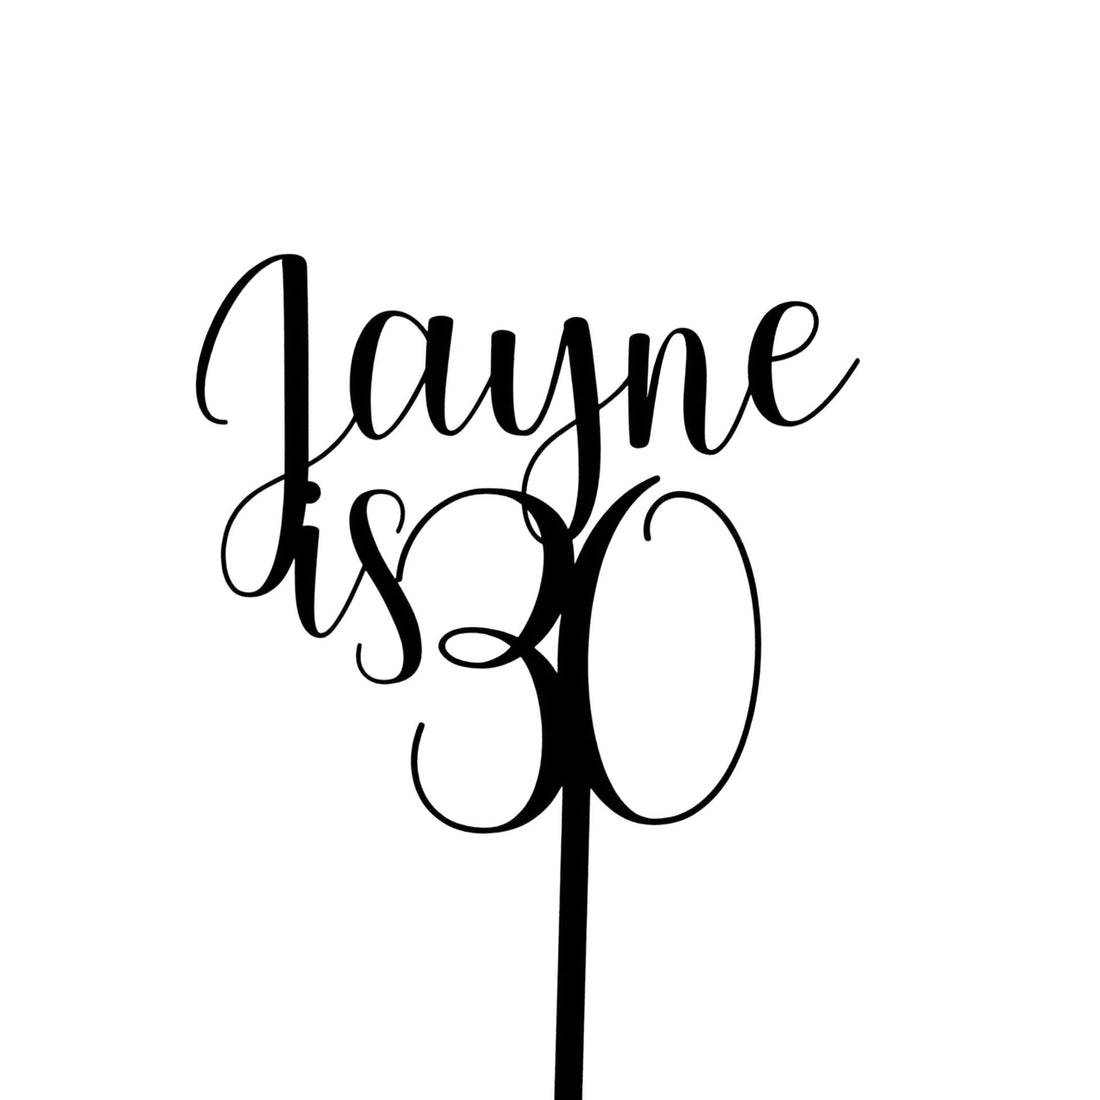 Name and Age Single Layer Acrylic Cake Topper - Cake Topper Warehouse